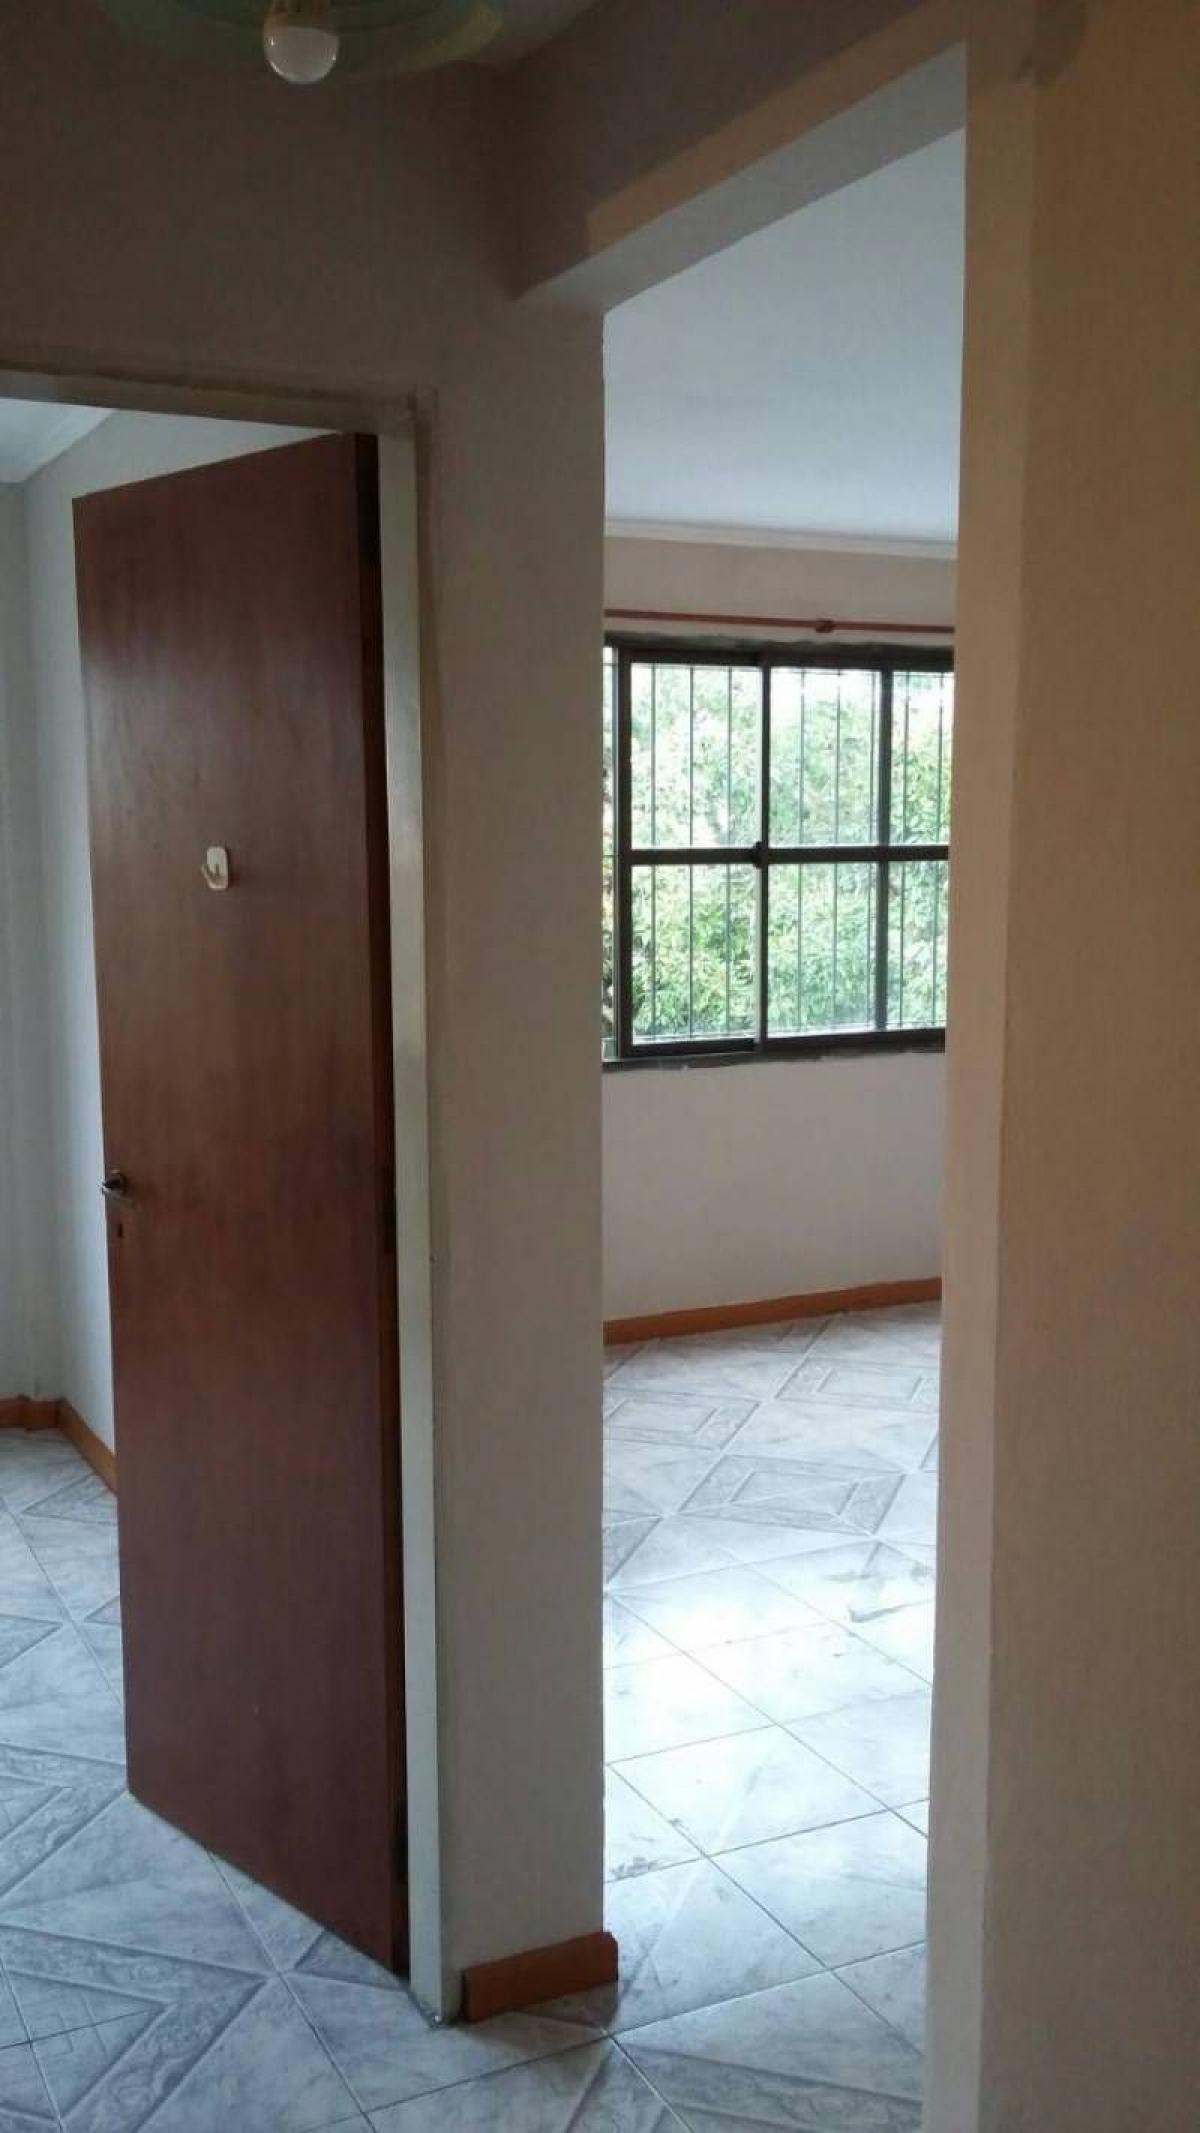 Picture of Apartment For Sale in Marcos Paz, Buenos Aires, Argentina